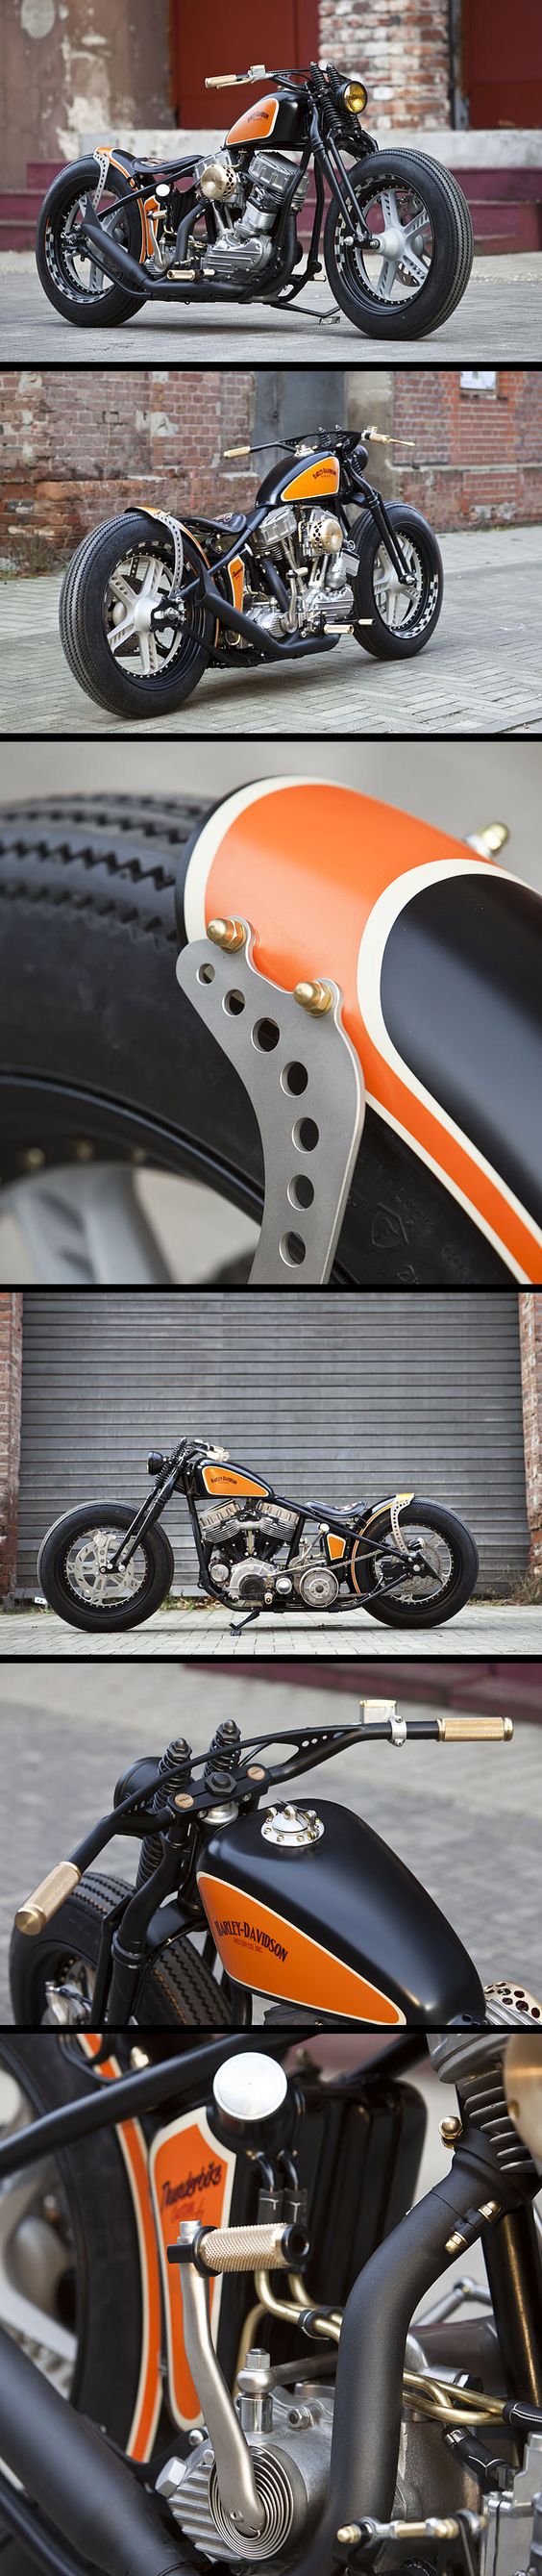 Harley Davidson 1951 Bobber par Thunderbike ________________________ PACKAIR INC. -- THE NAME TO TRUST FOR ALL INTERNATIONAL & DOMESTIC MOVES. Call today 310-337-9993 or visit  for a free quote on your shipment. #DontJustShipIt #PACKAIR-IT!